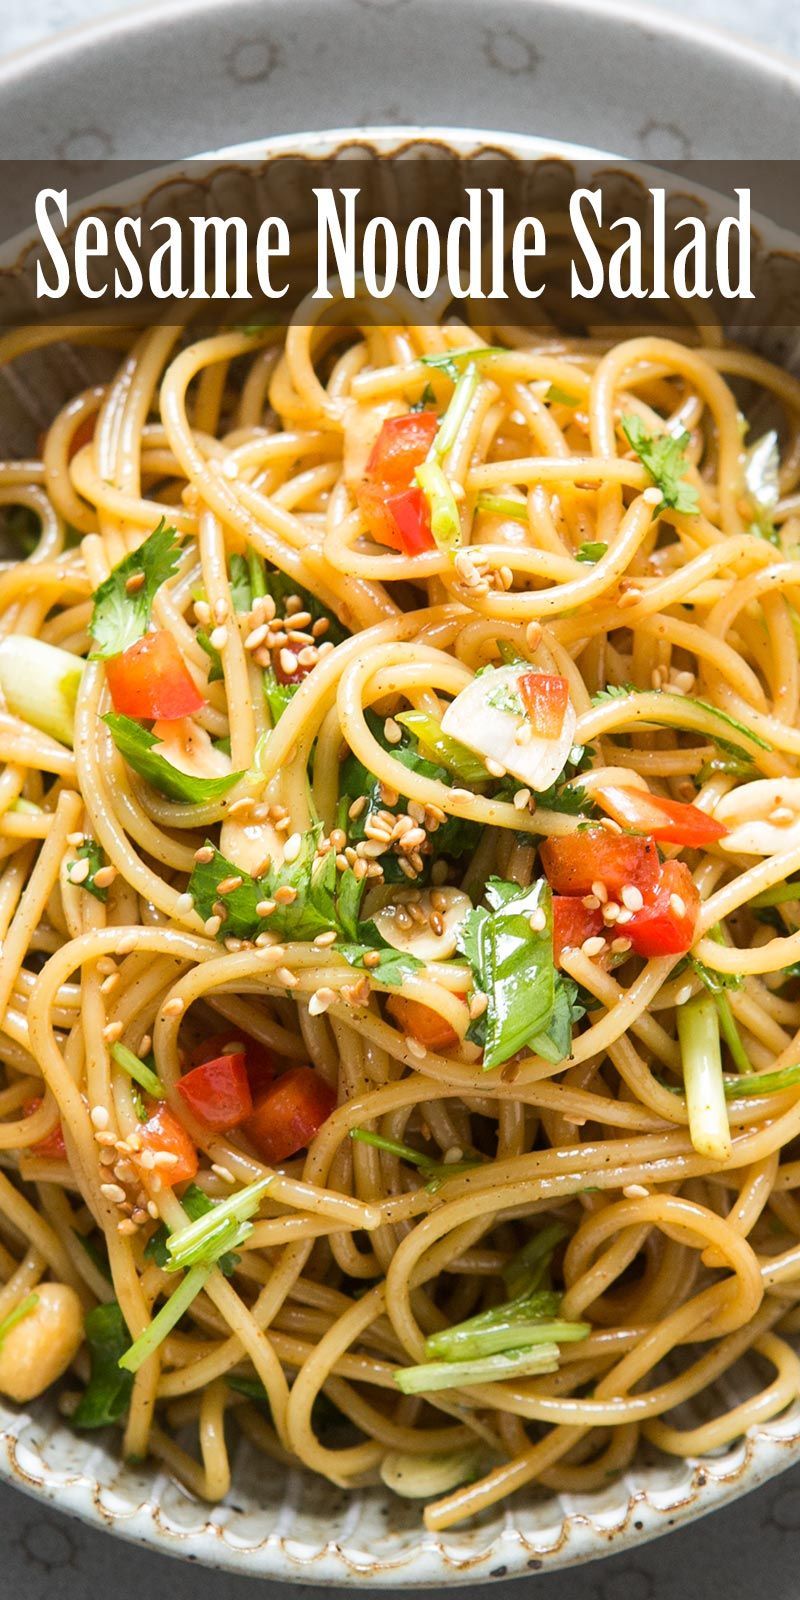 Quick and easy pasta salad for a hot day! Thin noodles infused with a sesame, honey, soy sauce dressing. So good you’ll want to